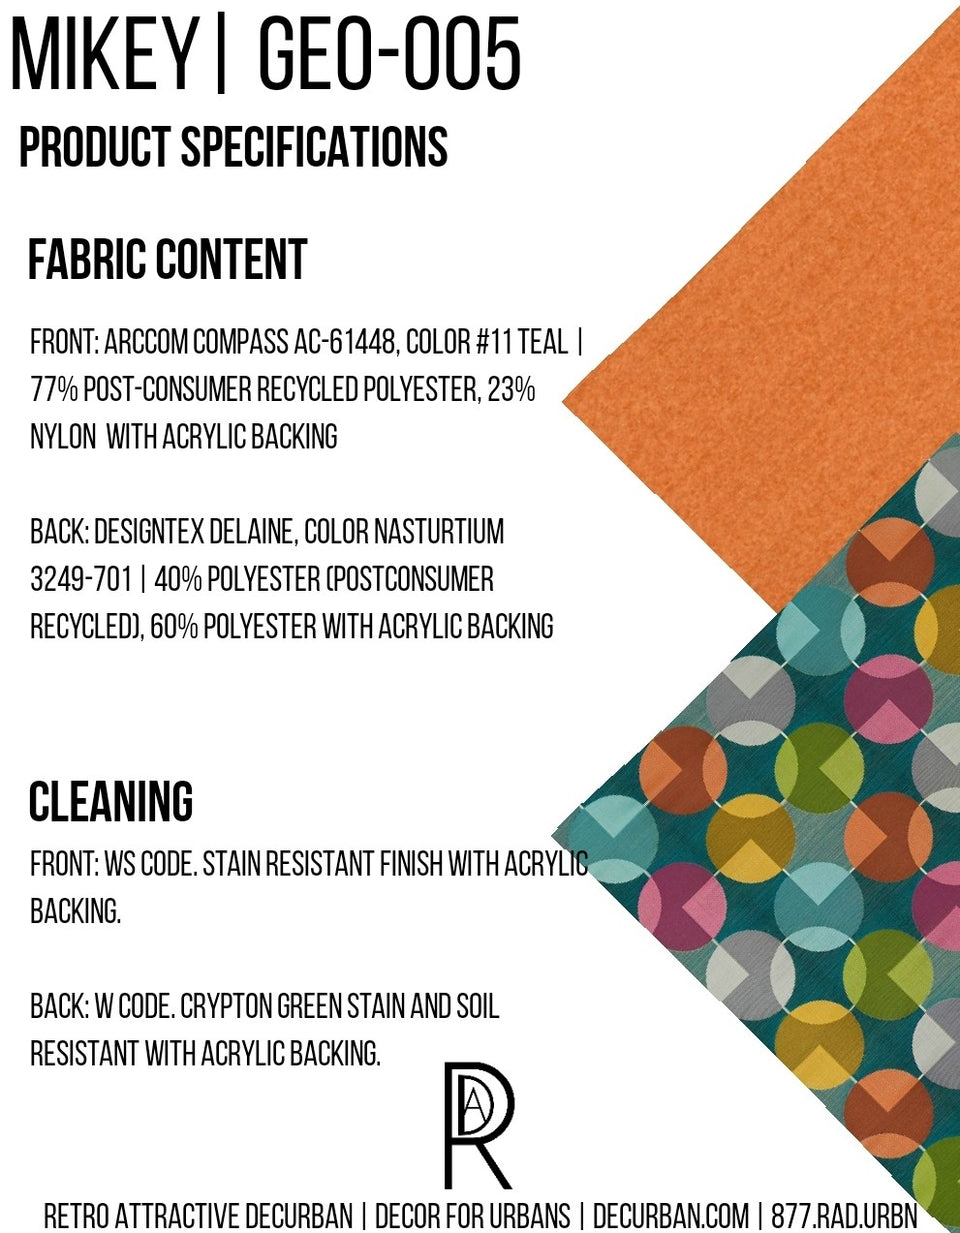 Decurban Mikey Fabric Specification Sheet